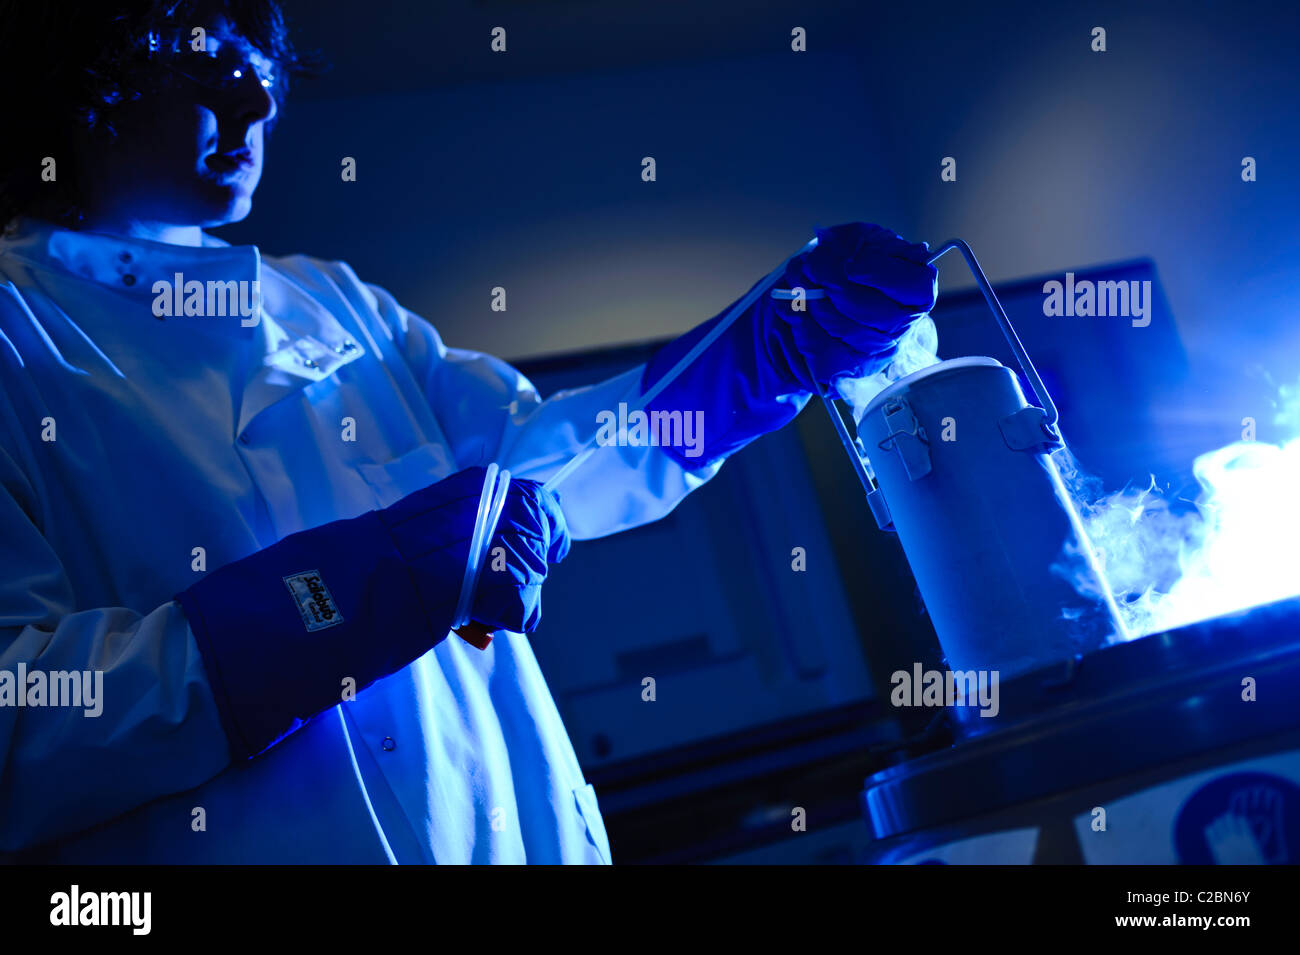 Young male scientist wearing goggles lab coat and blue gloves lifting cell cultures from liquid nitrogen dynamically lit blue Stock Photo